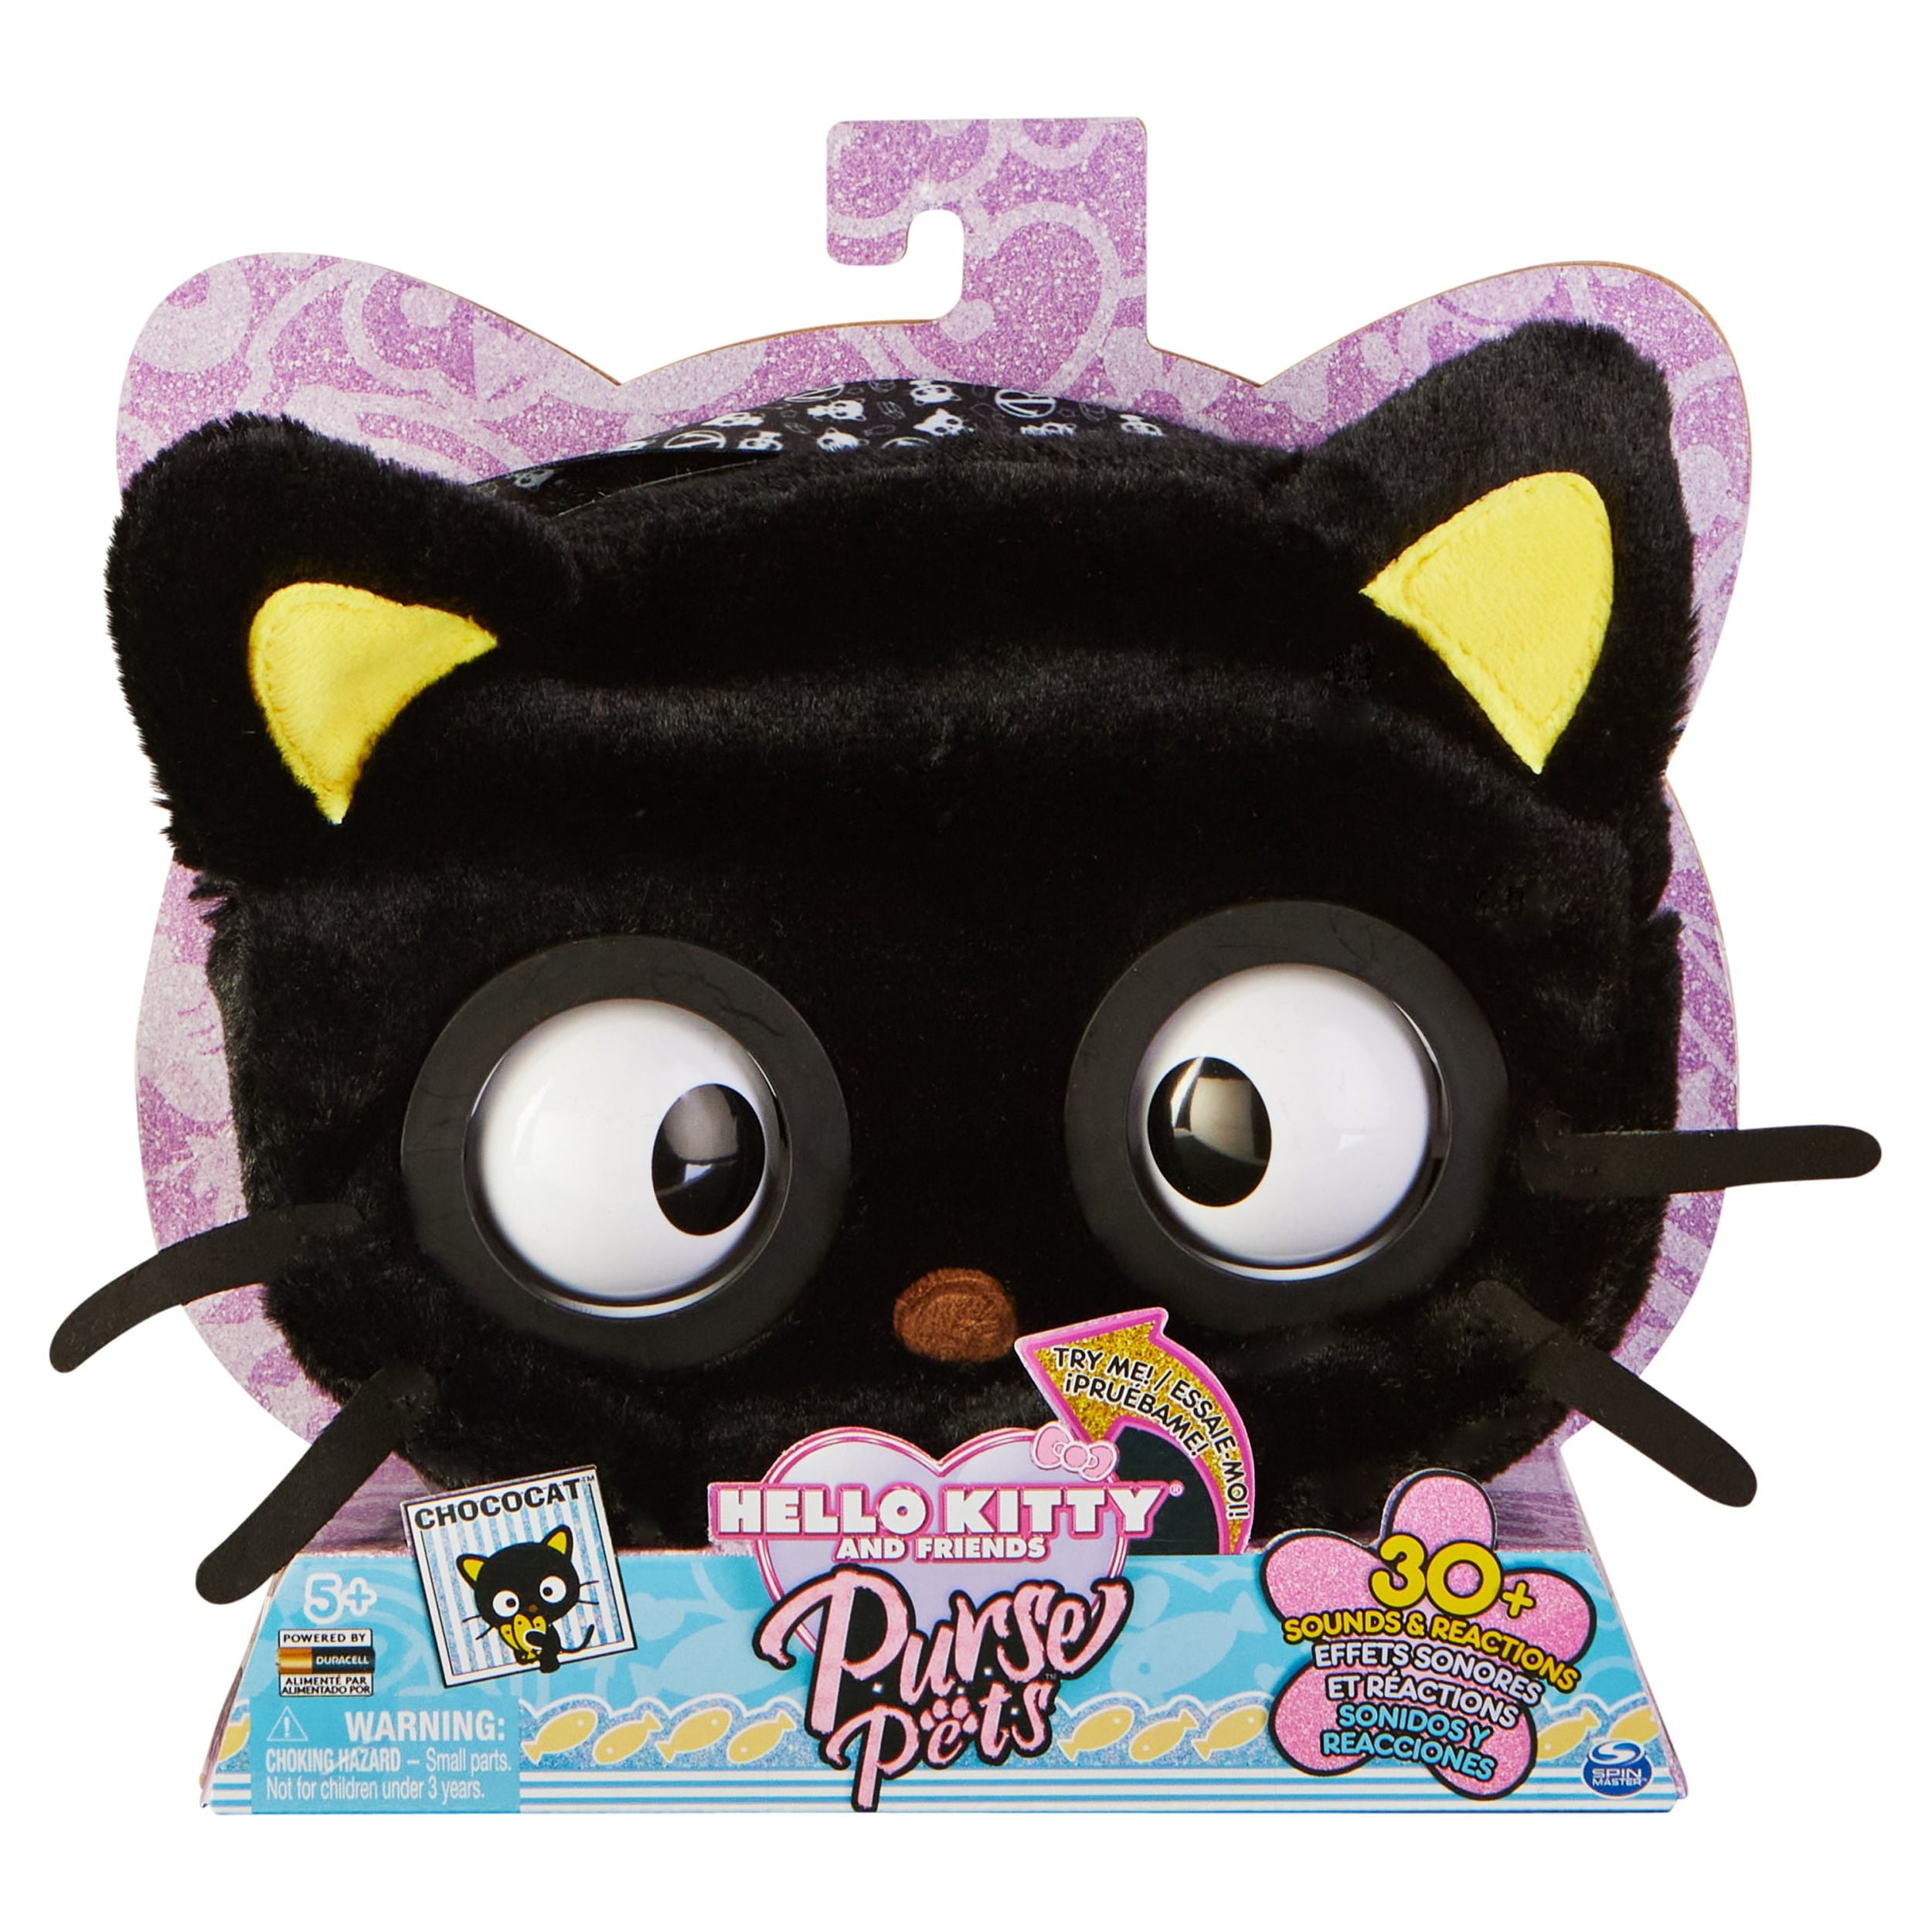 Purse Pets, Sanrio Hello Kitty and Friends, Chococat Interactive Pet Toy  and Handbag with over 30 Sounds and Reactions, Kids Toys for Girls | Spin  Master